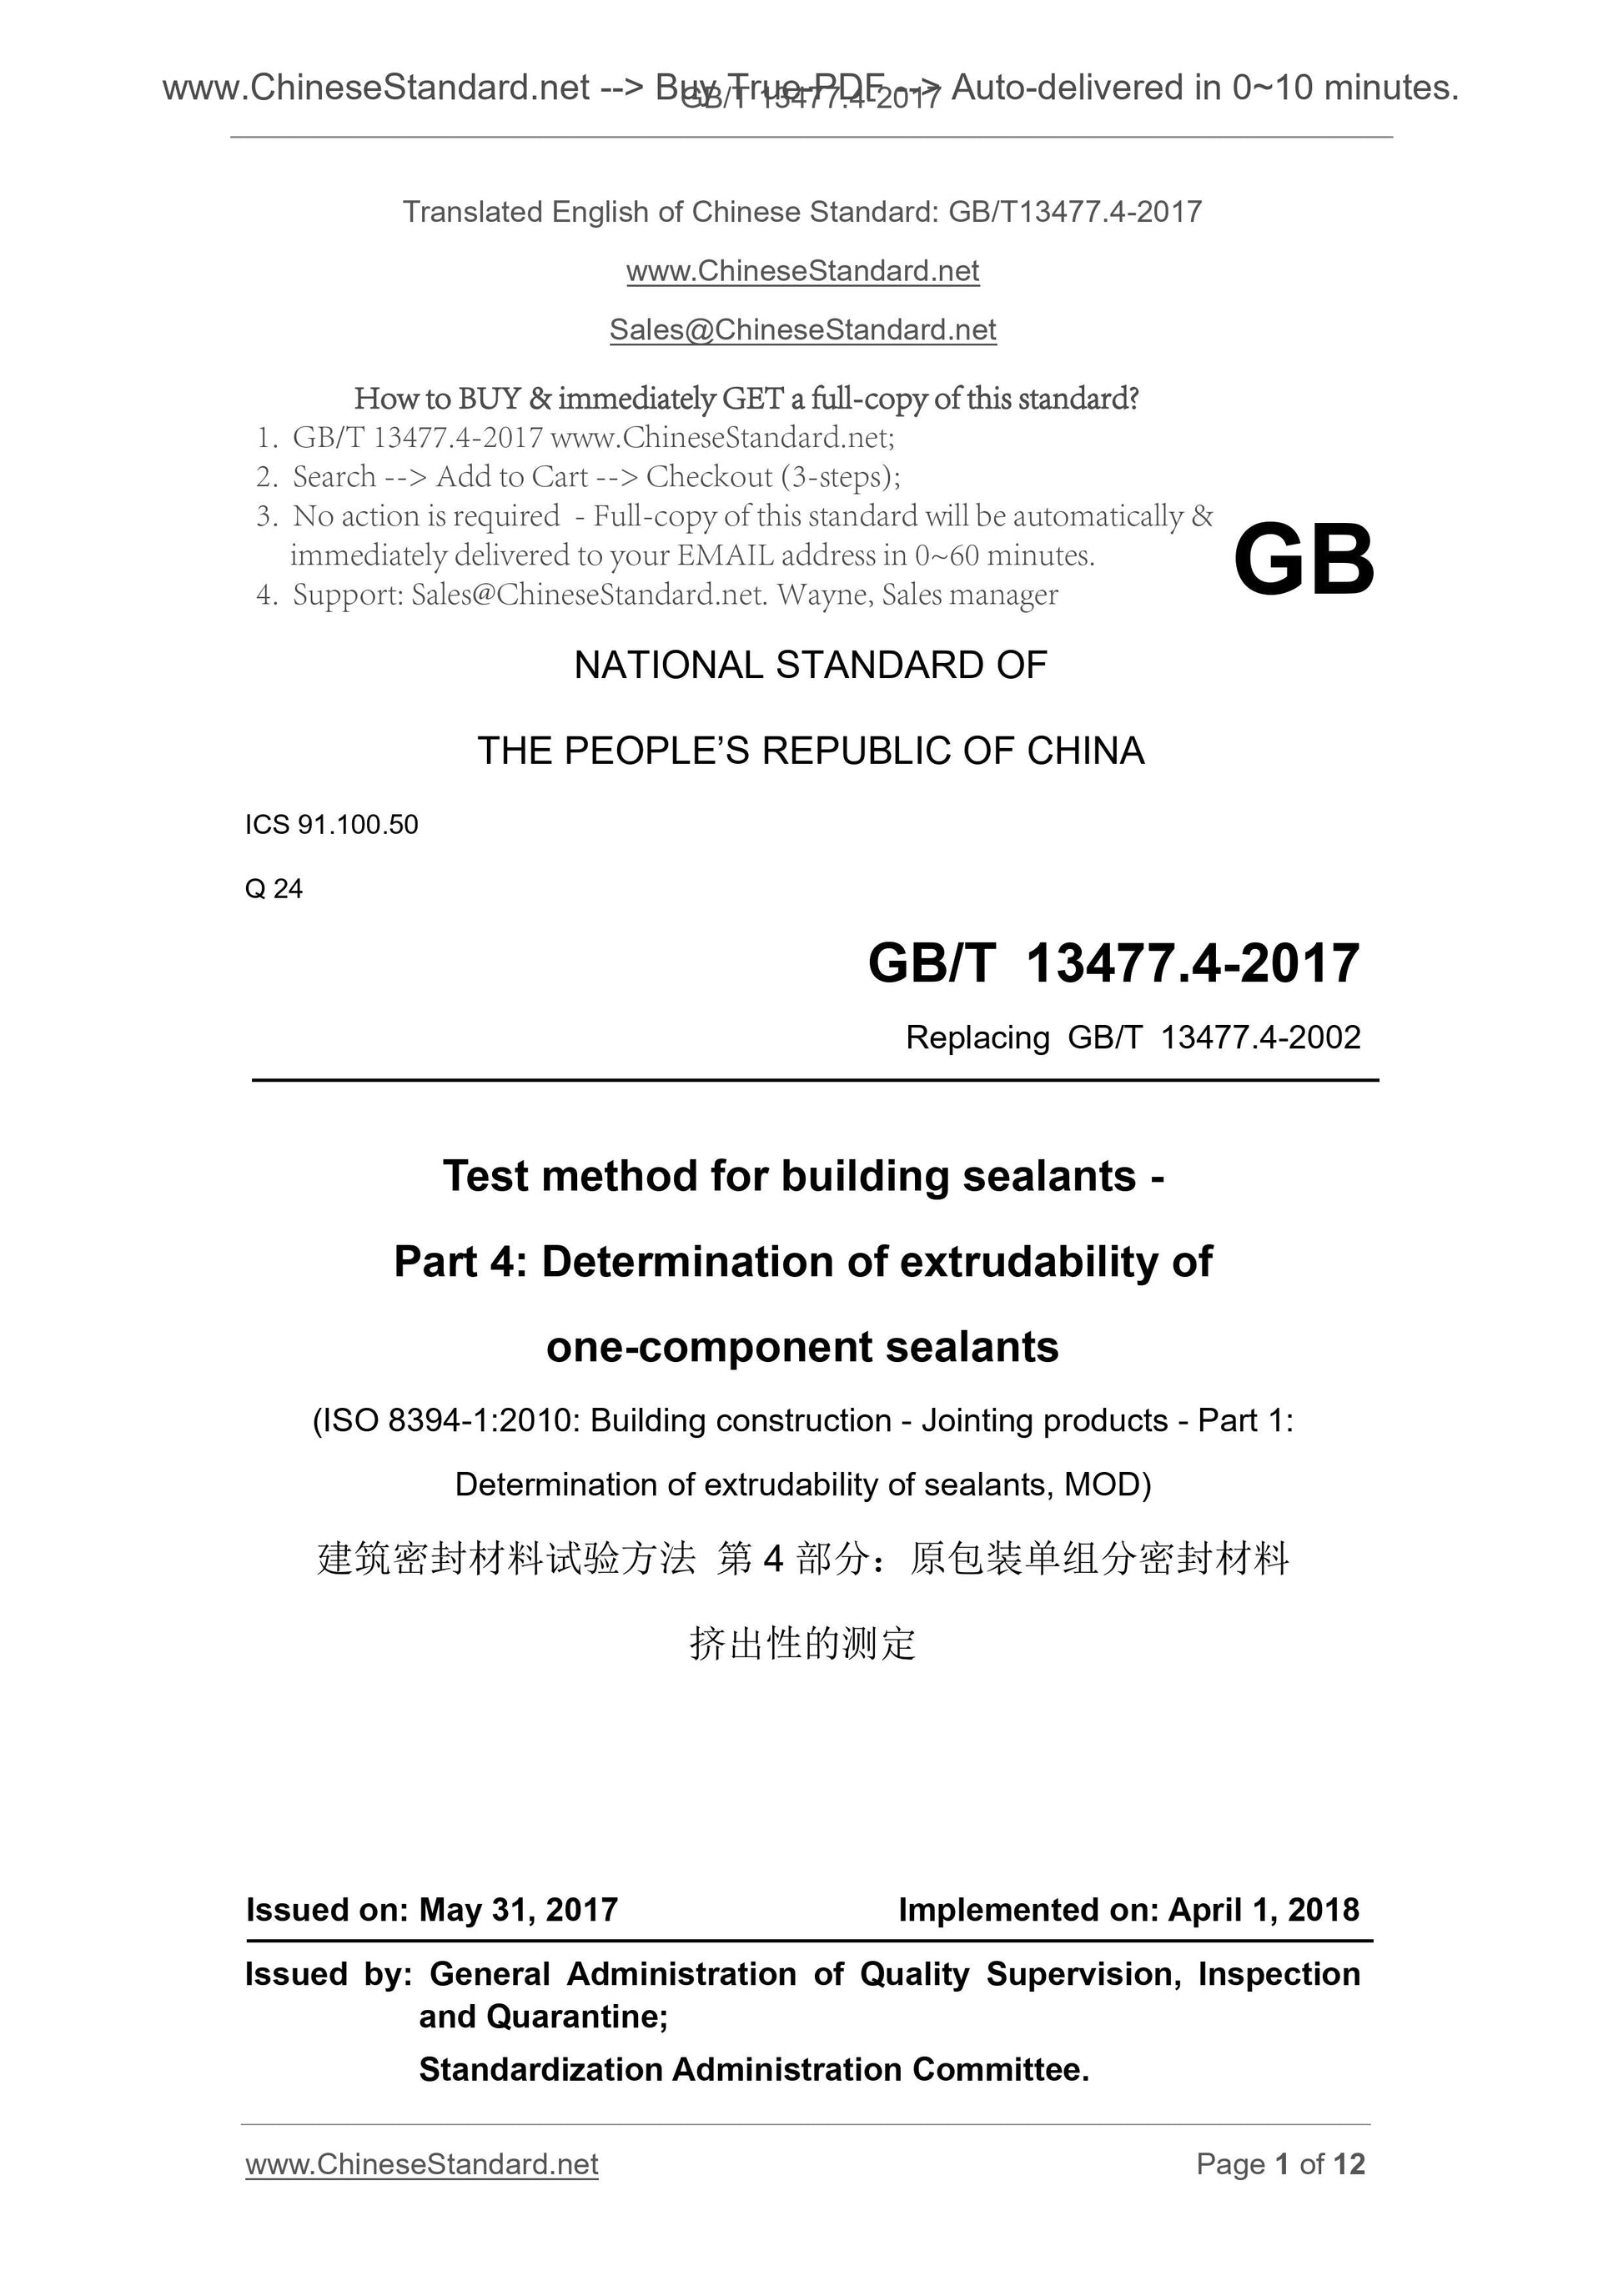 GB/T 13477.4-2017 Page 1